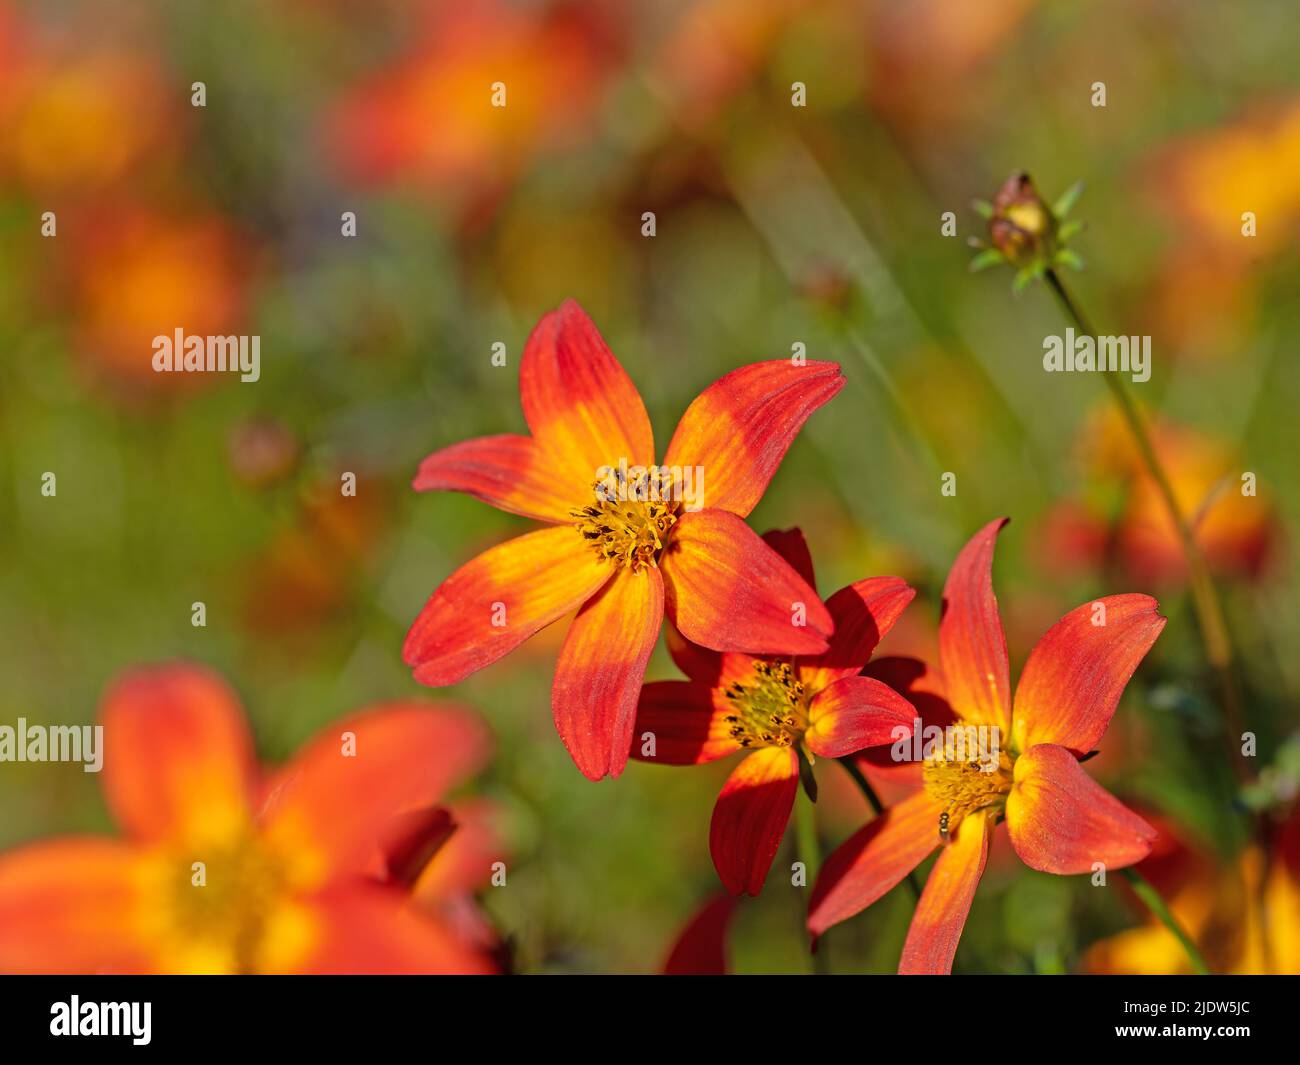 Flowering bidens in a close-up Stock Photo